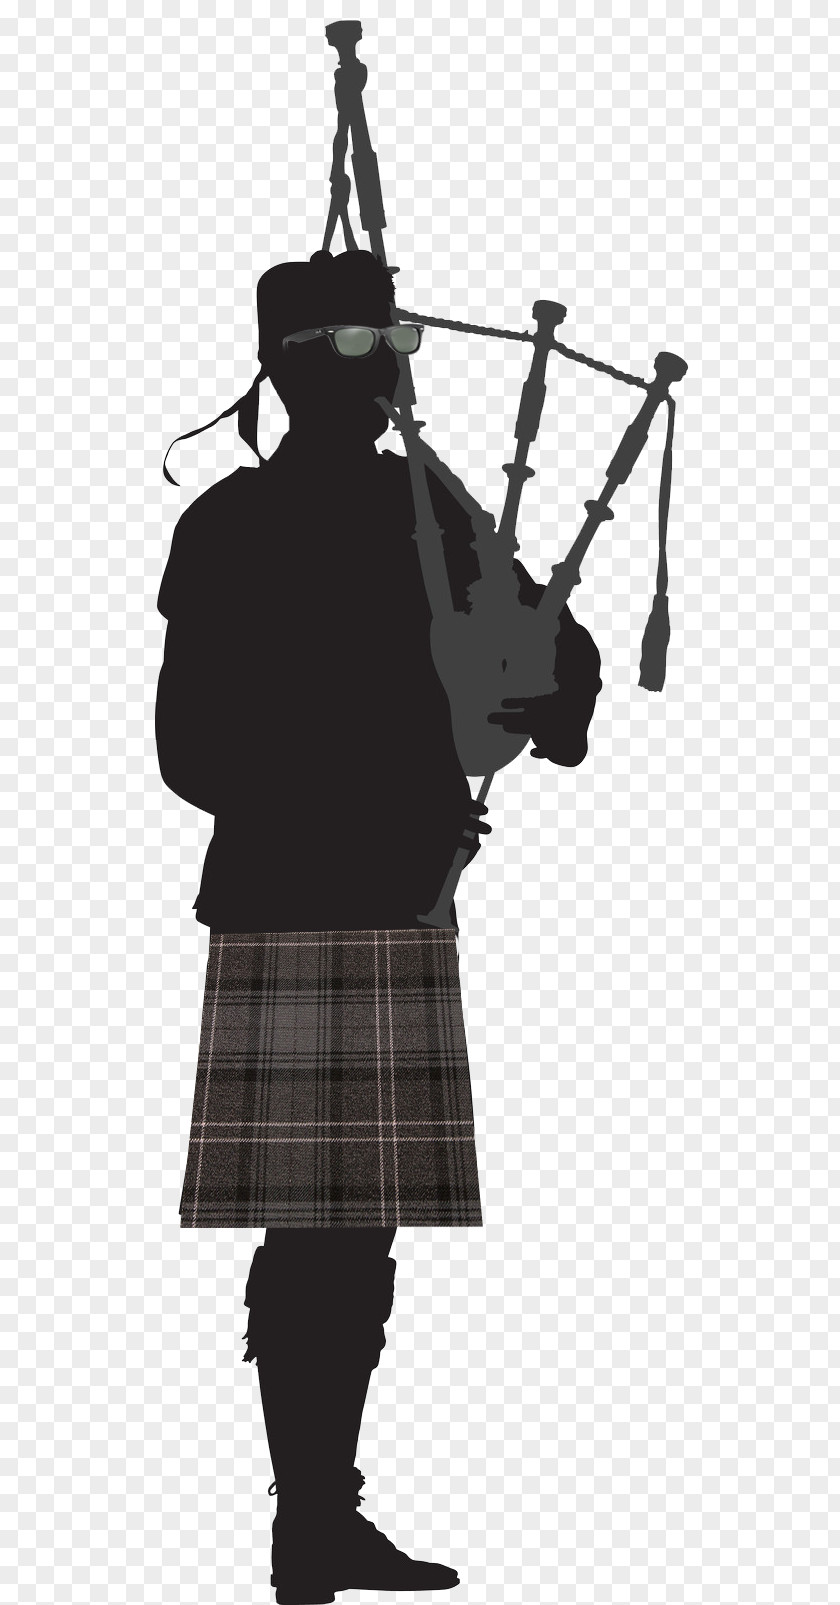 Silhouette Scotland Bagpipes Vector Graphics Royalty-free Stock Photography PNG